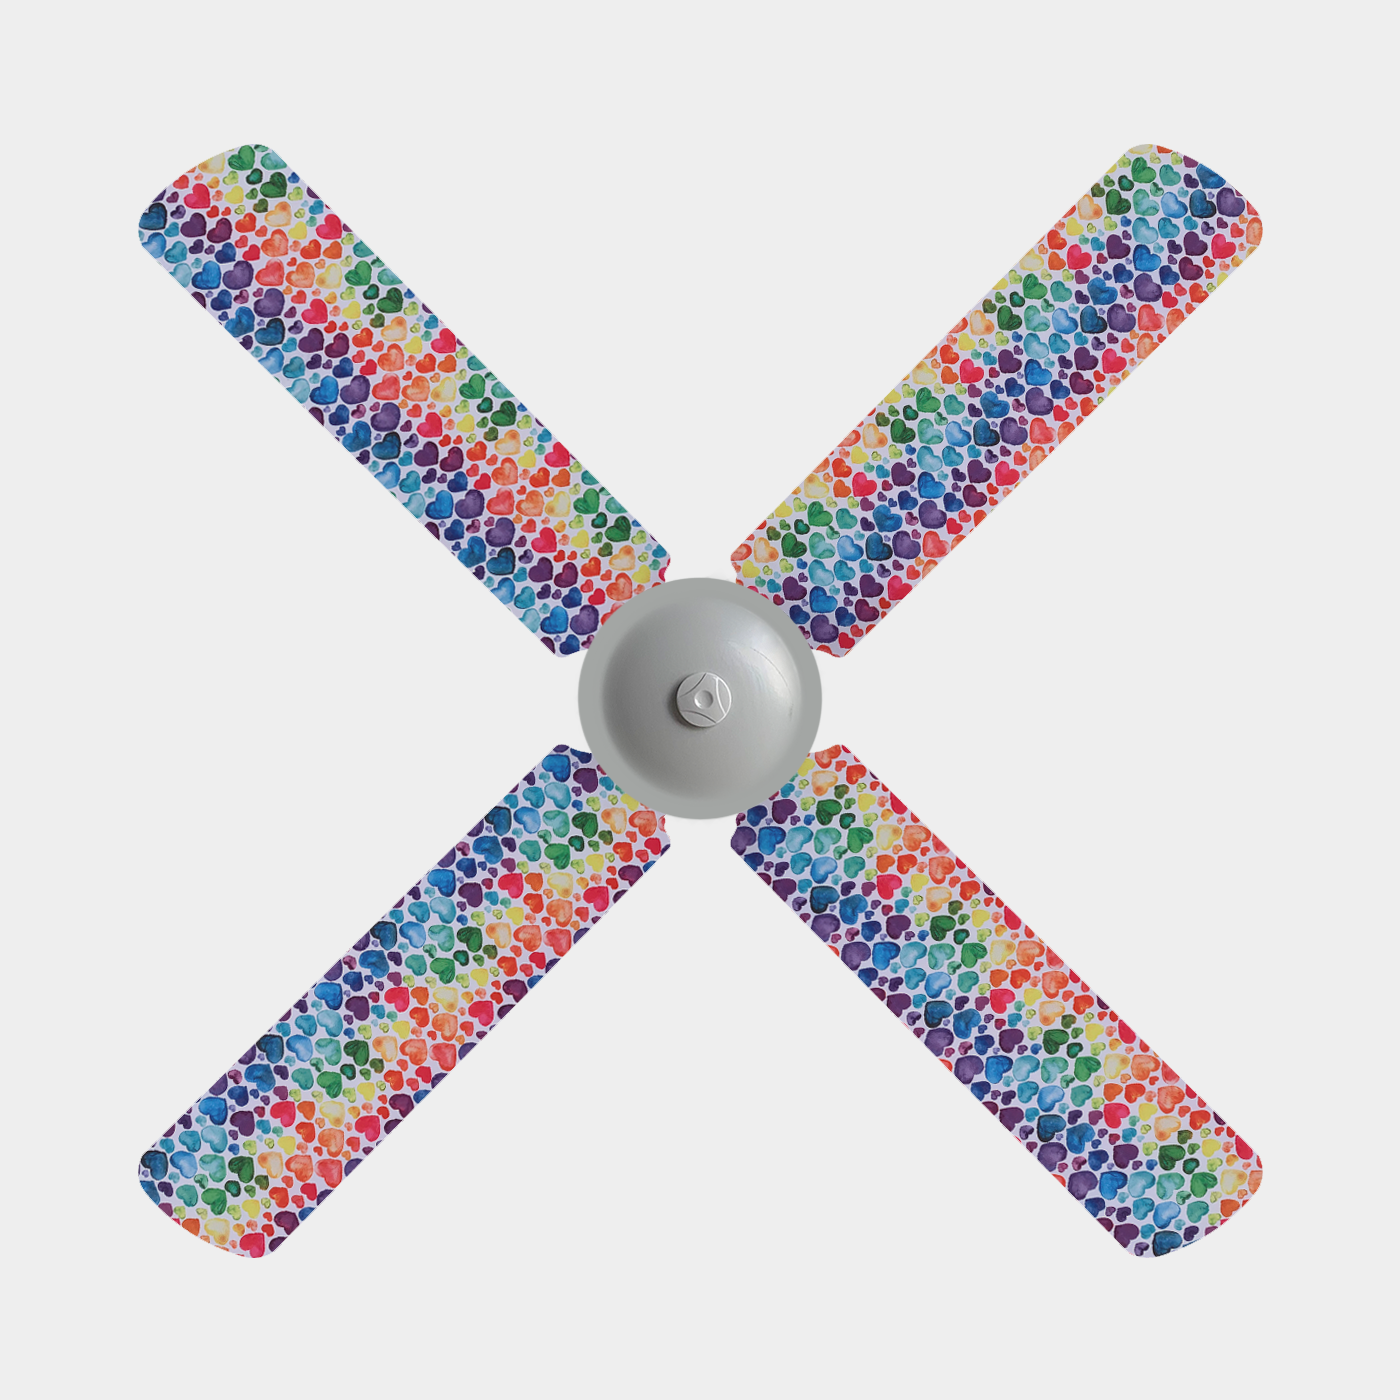 Fan blade covers with white background and blue, purple, red, orange, yellow, and green hearts on a four blade fan